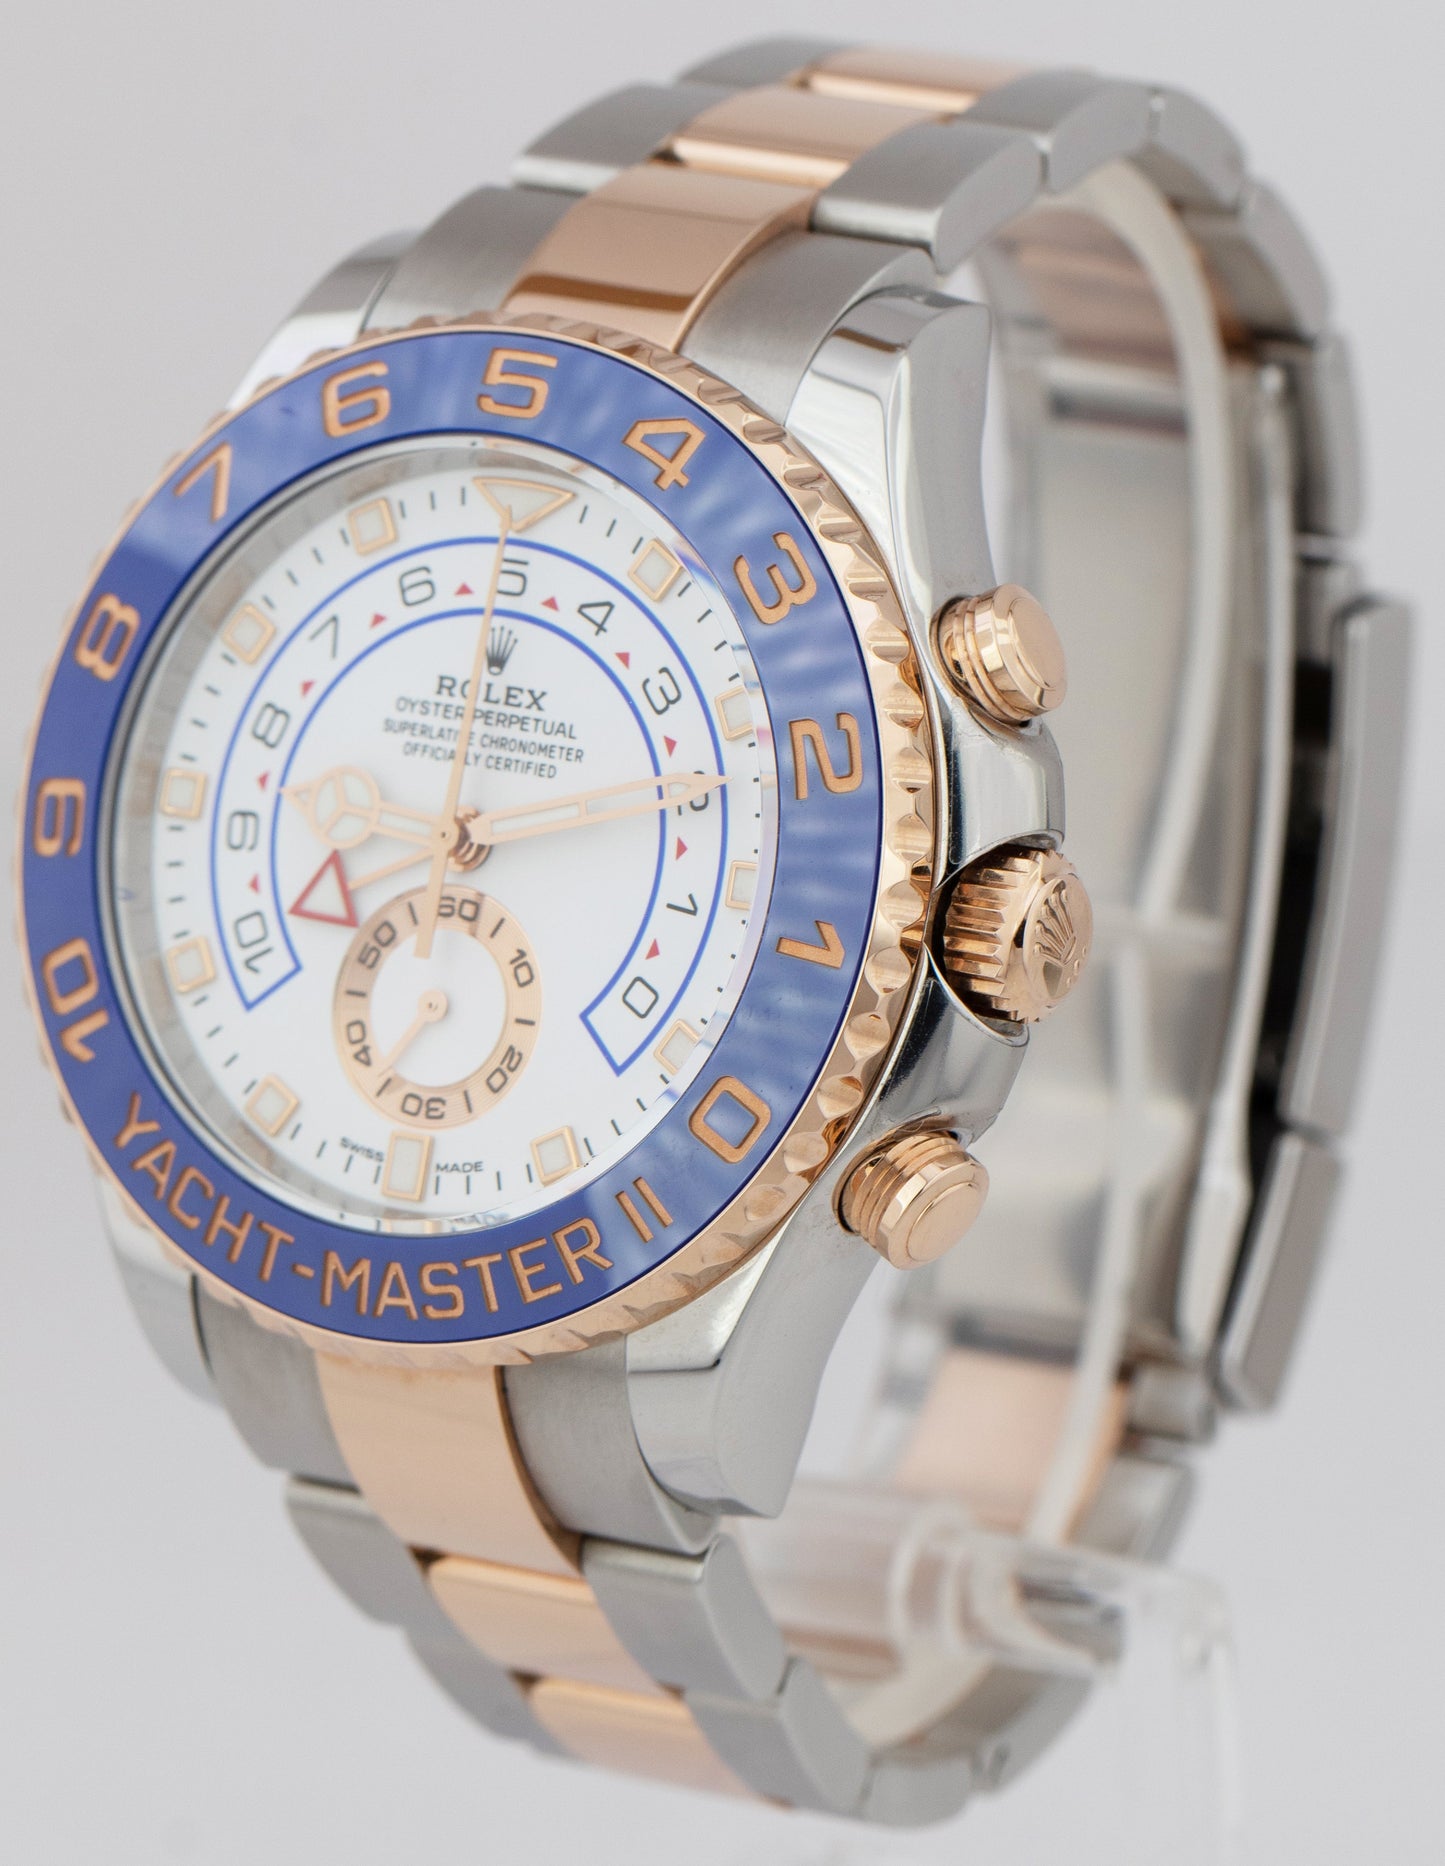 2019 Rolex Yacht-Master II White Two-Tone Rose Gold Steel 116681 44mm Watch CARD